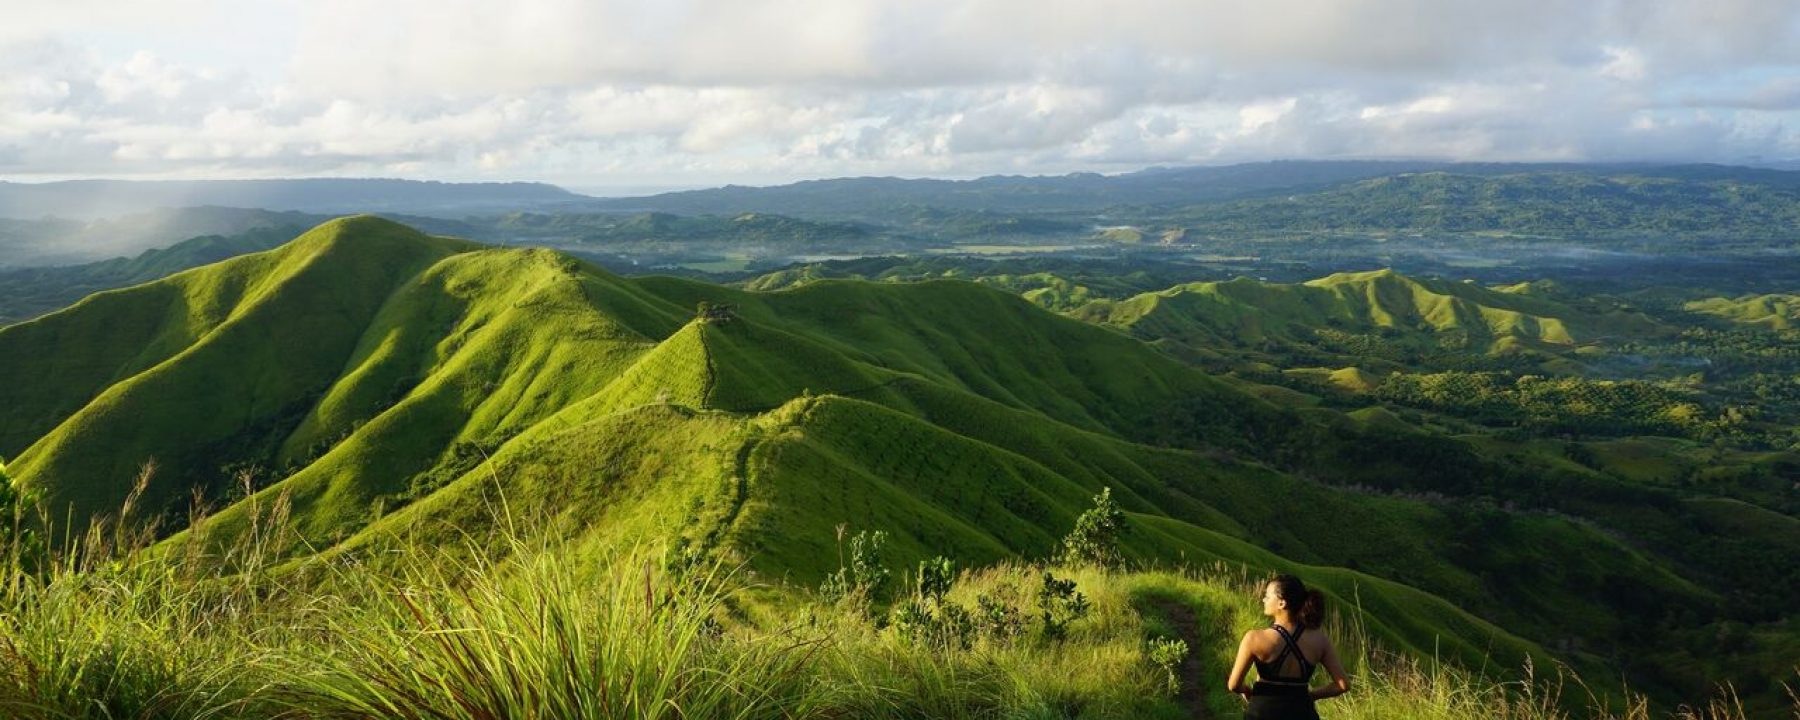 Bohol Alicia Trekking,Tips, how to go there, bohol adventure backpacking